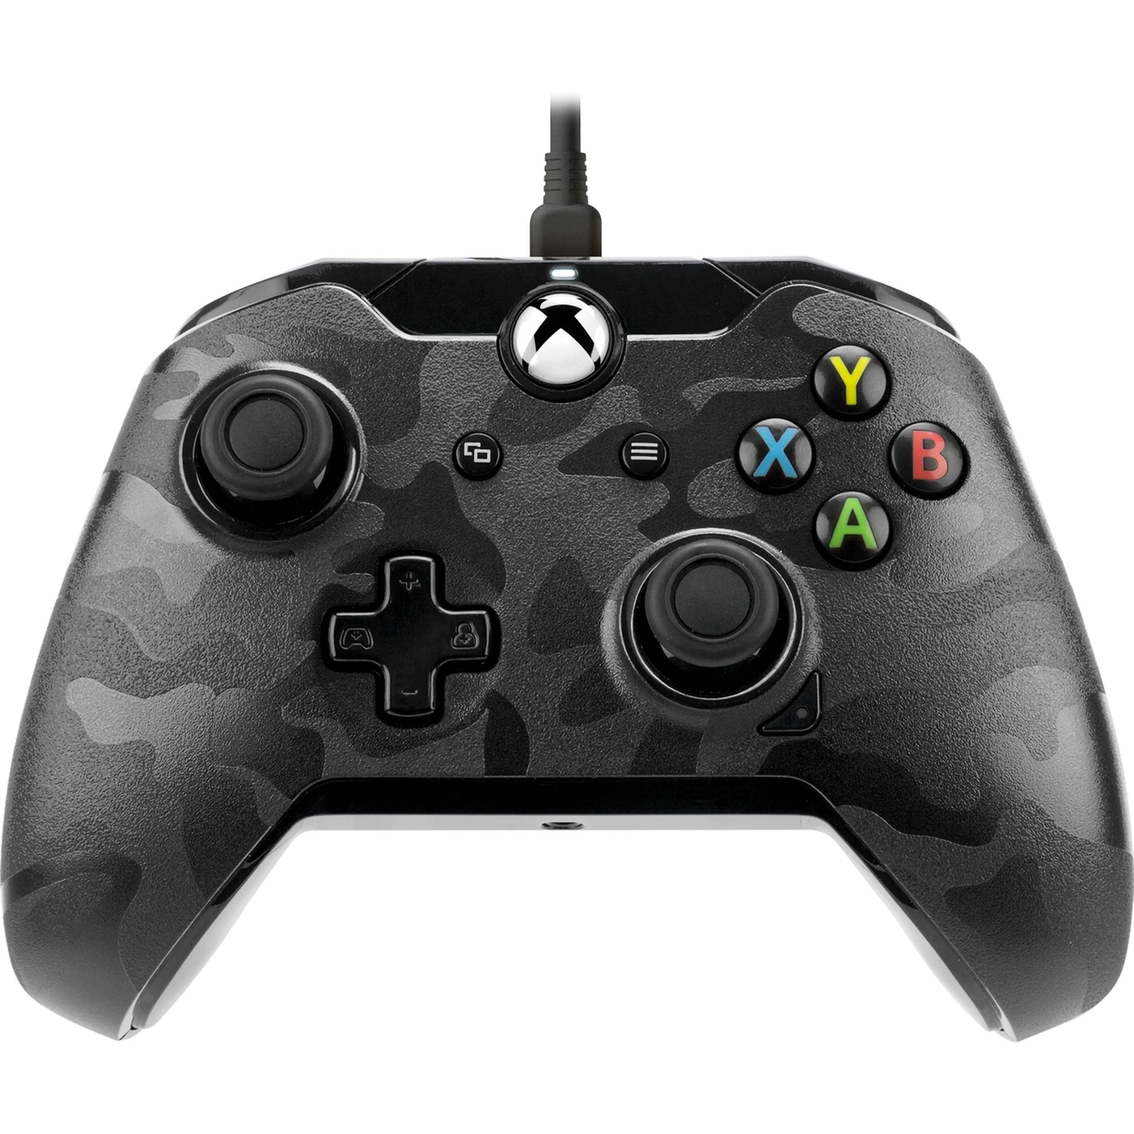 Pdp Wired Controller For Xbox One And Pc Pc Gaming Accessories Electronics Shop The Exchange